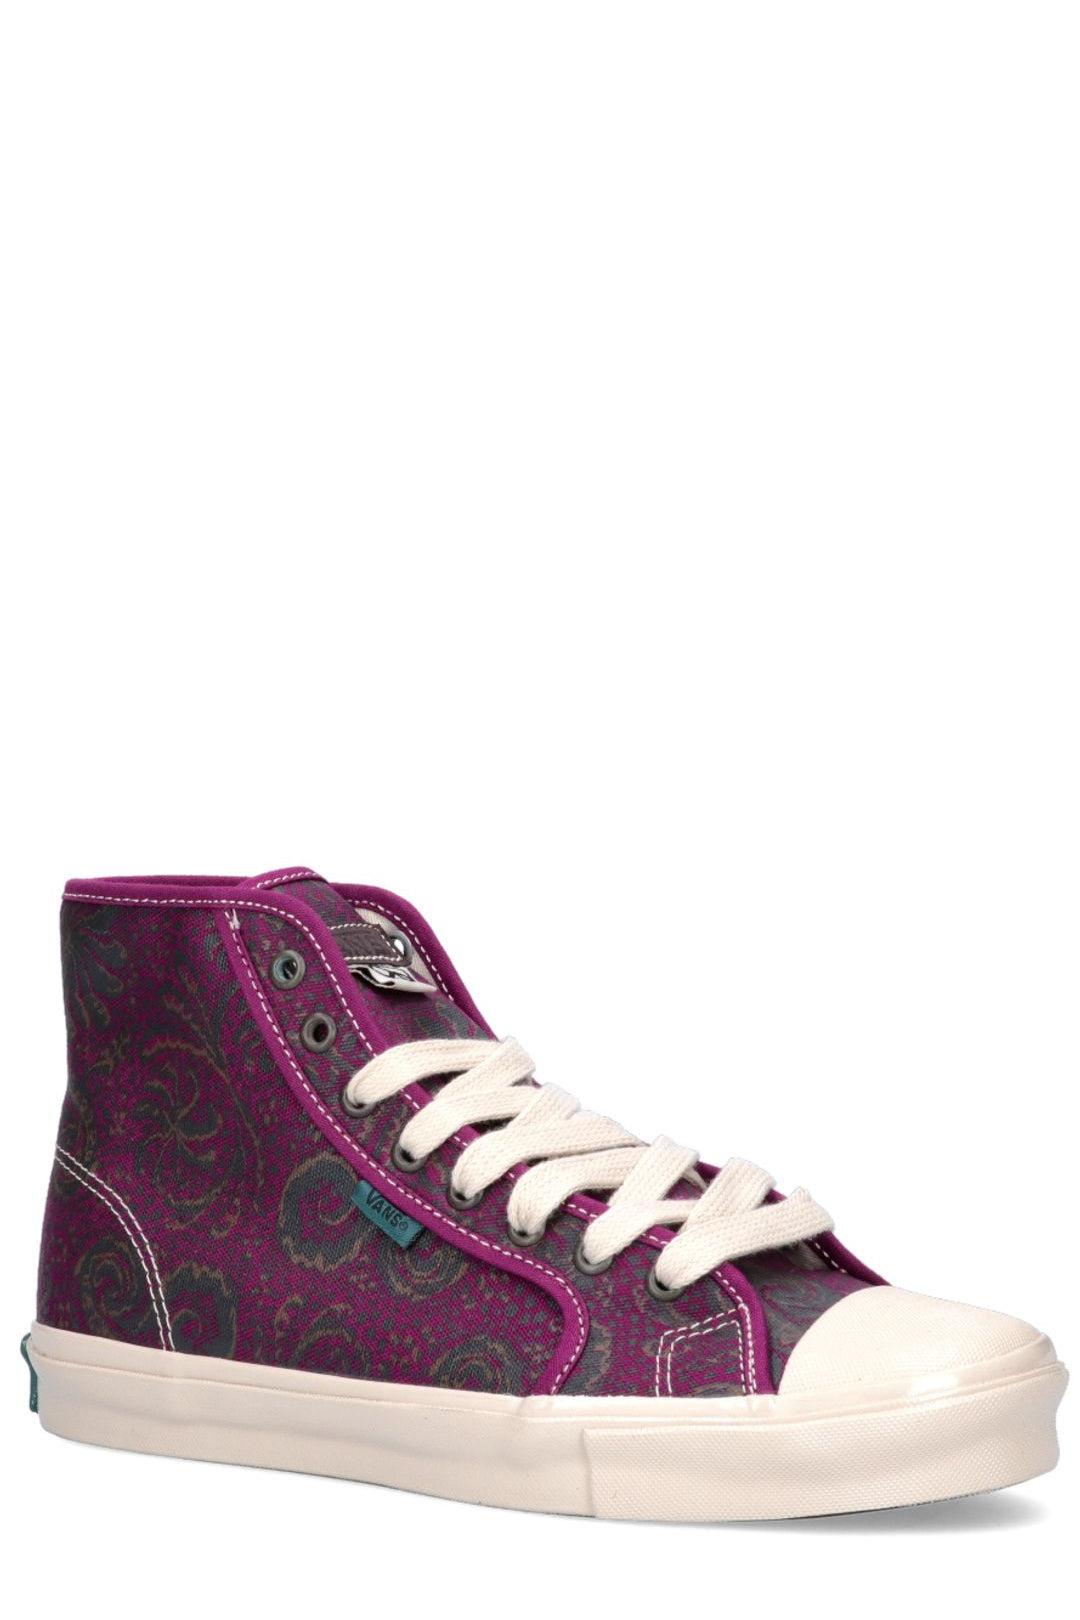 Vans Rubber Taka Hayashia Og Style 24 Lx High-top Sneakers in Purple for  Men - Lyst